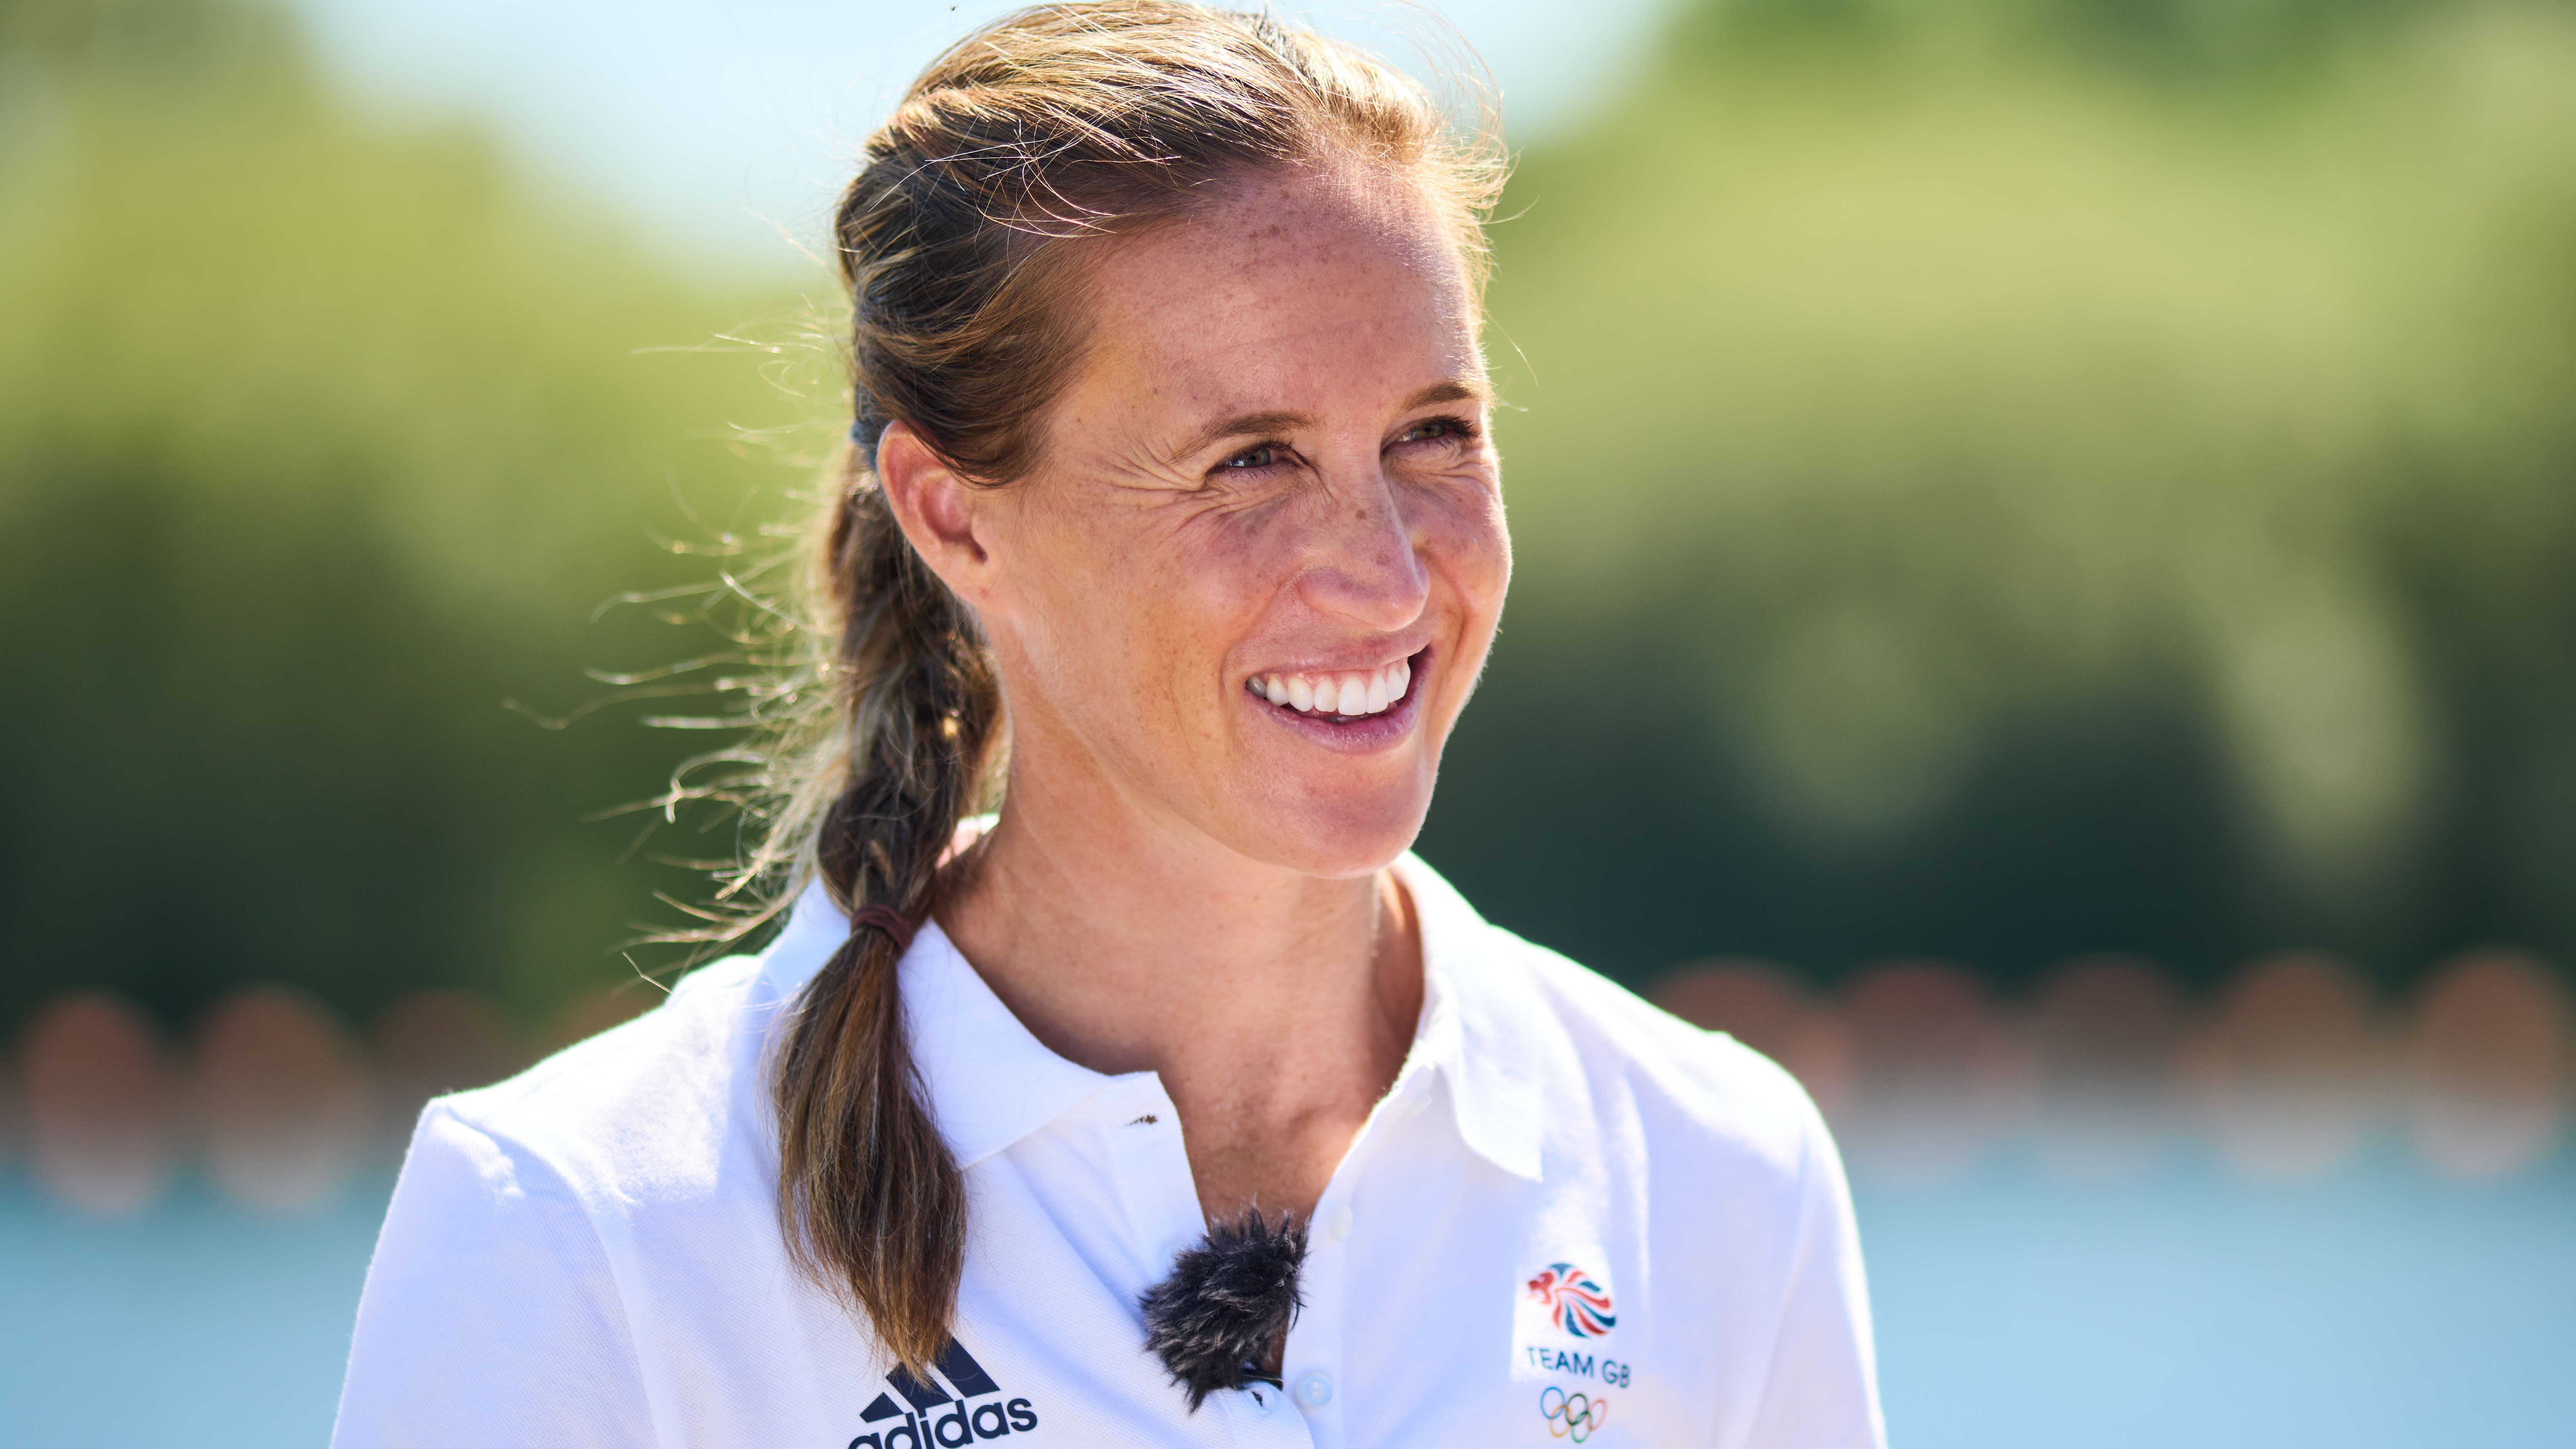 Helen Glover hopes Paris 2024 will be more like her experience in London and Rio